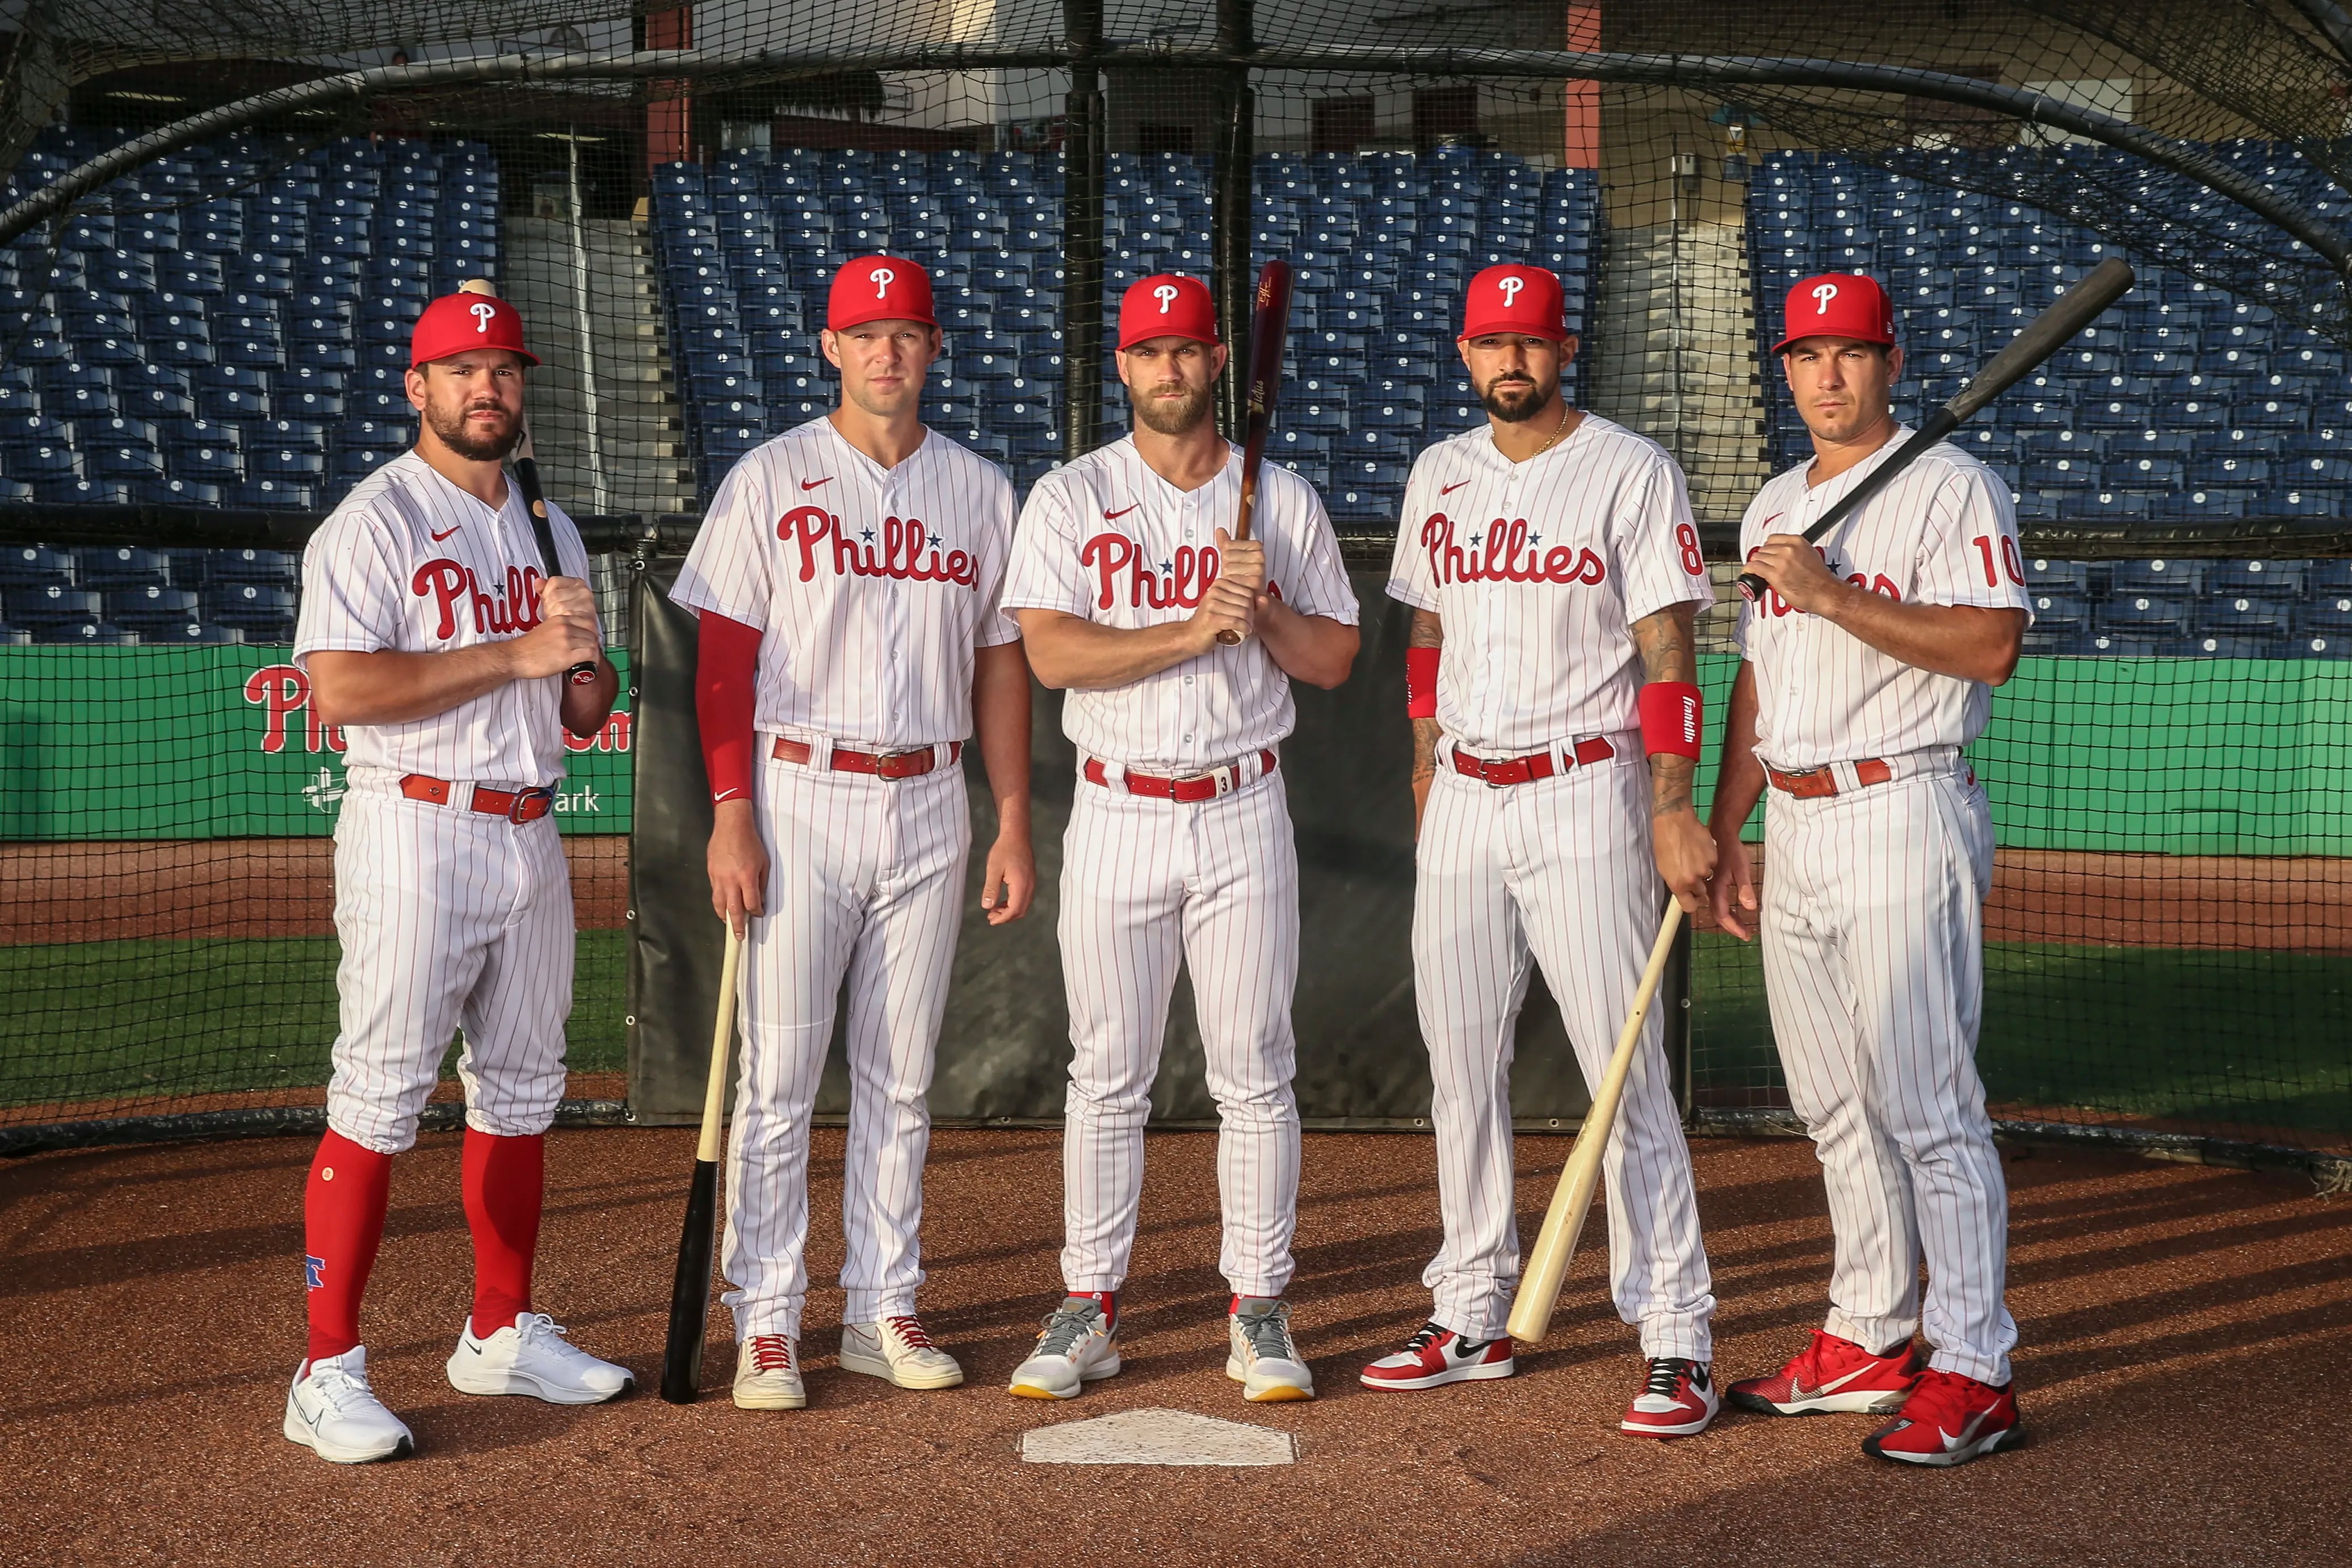 Phillies fans will love catching prospect Alfaro's warlike mentality   Phillies Nation - Your source for Philadelphia Phillies news, opinion,  history, rumors, events, and other fun stuff.